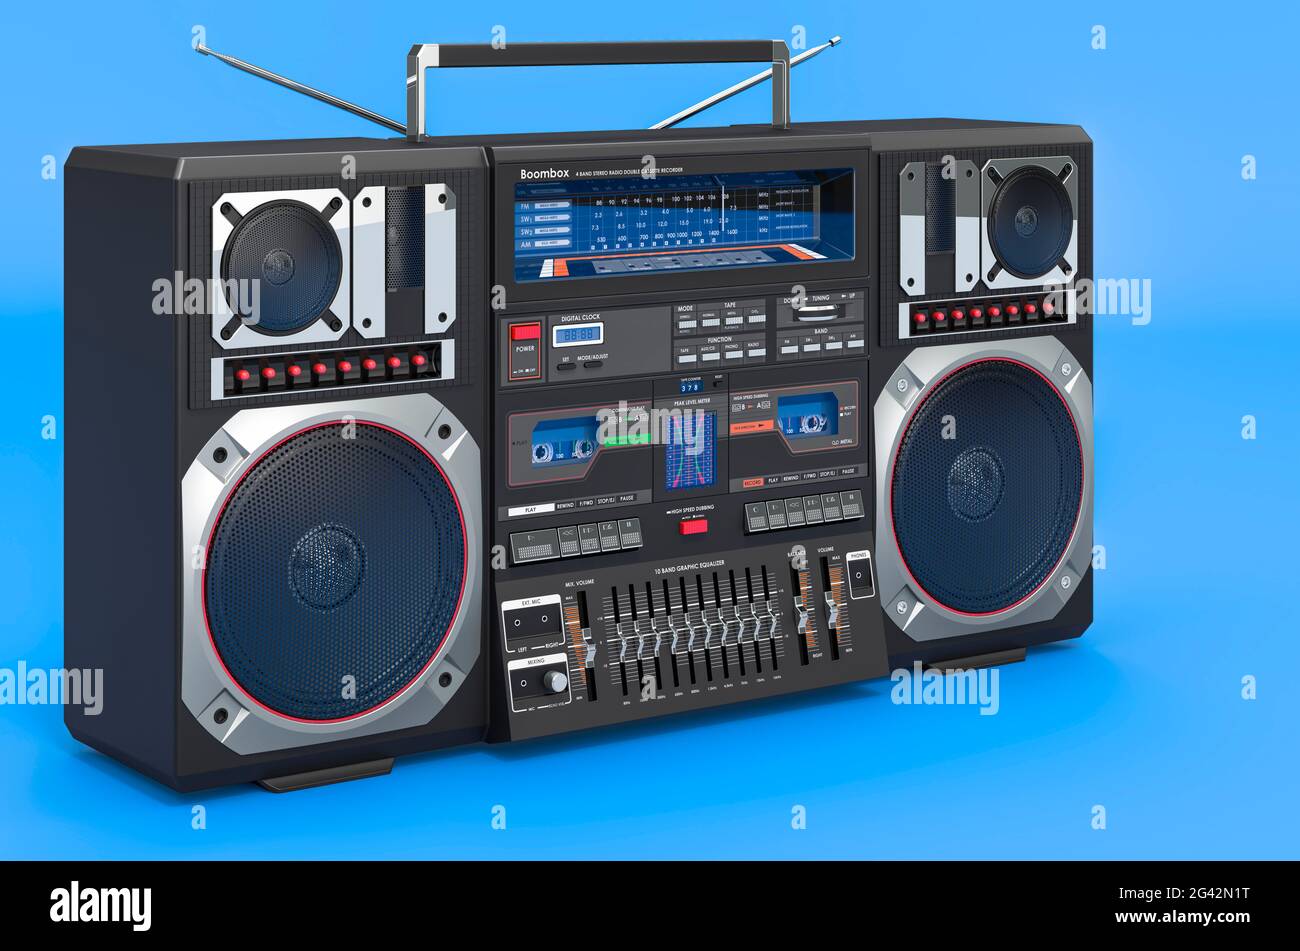 Boombox on blue background, 3D rendering Stock Photo